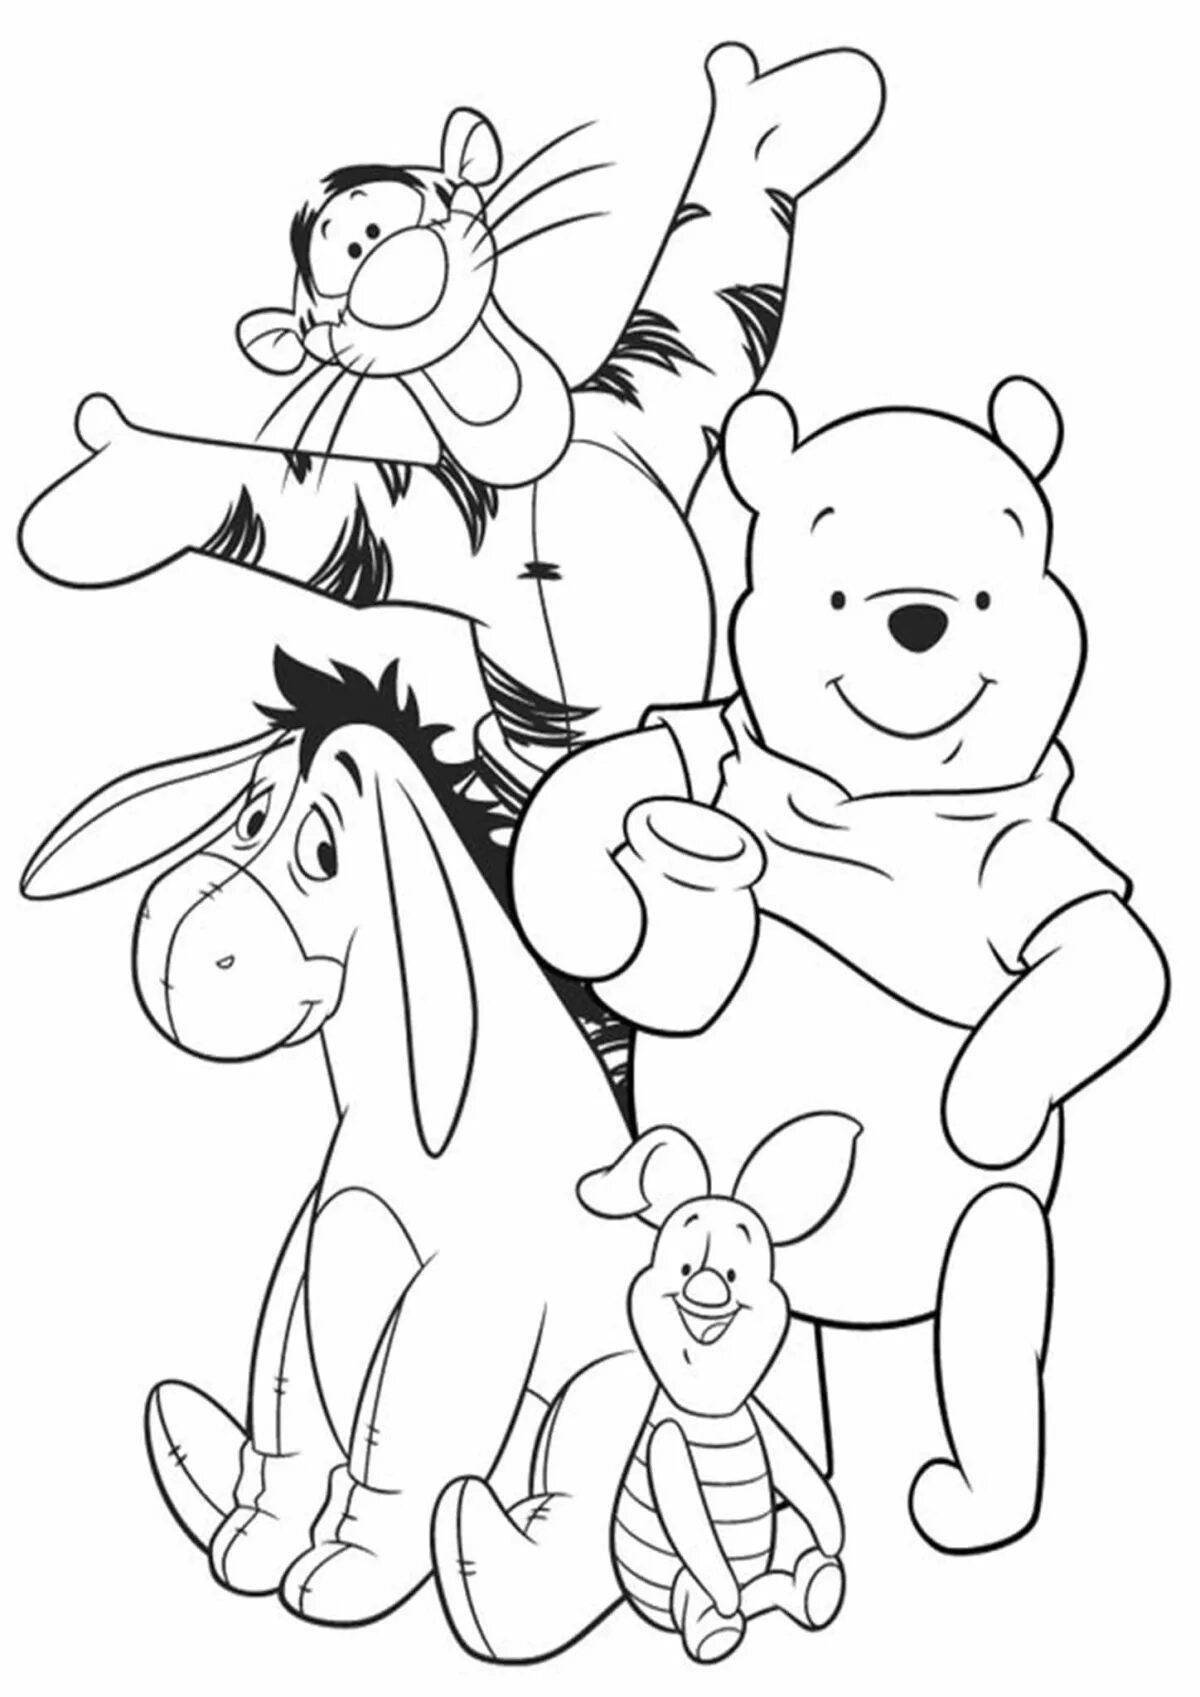 Coloring Winnie the Pooh and his friends